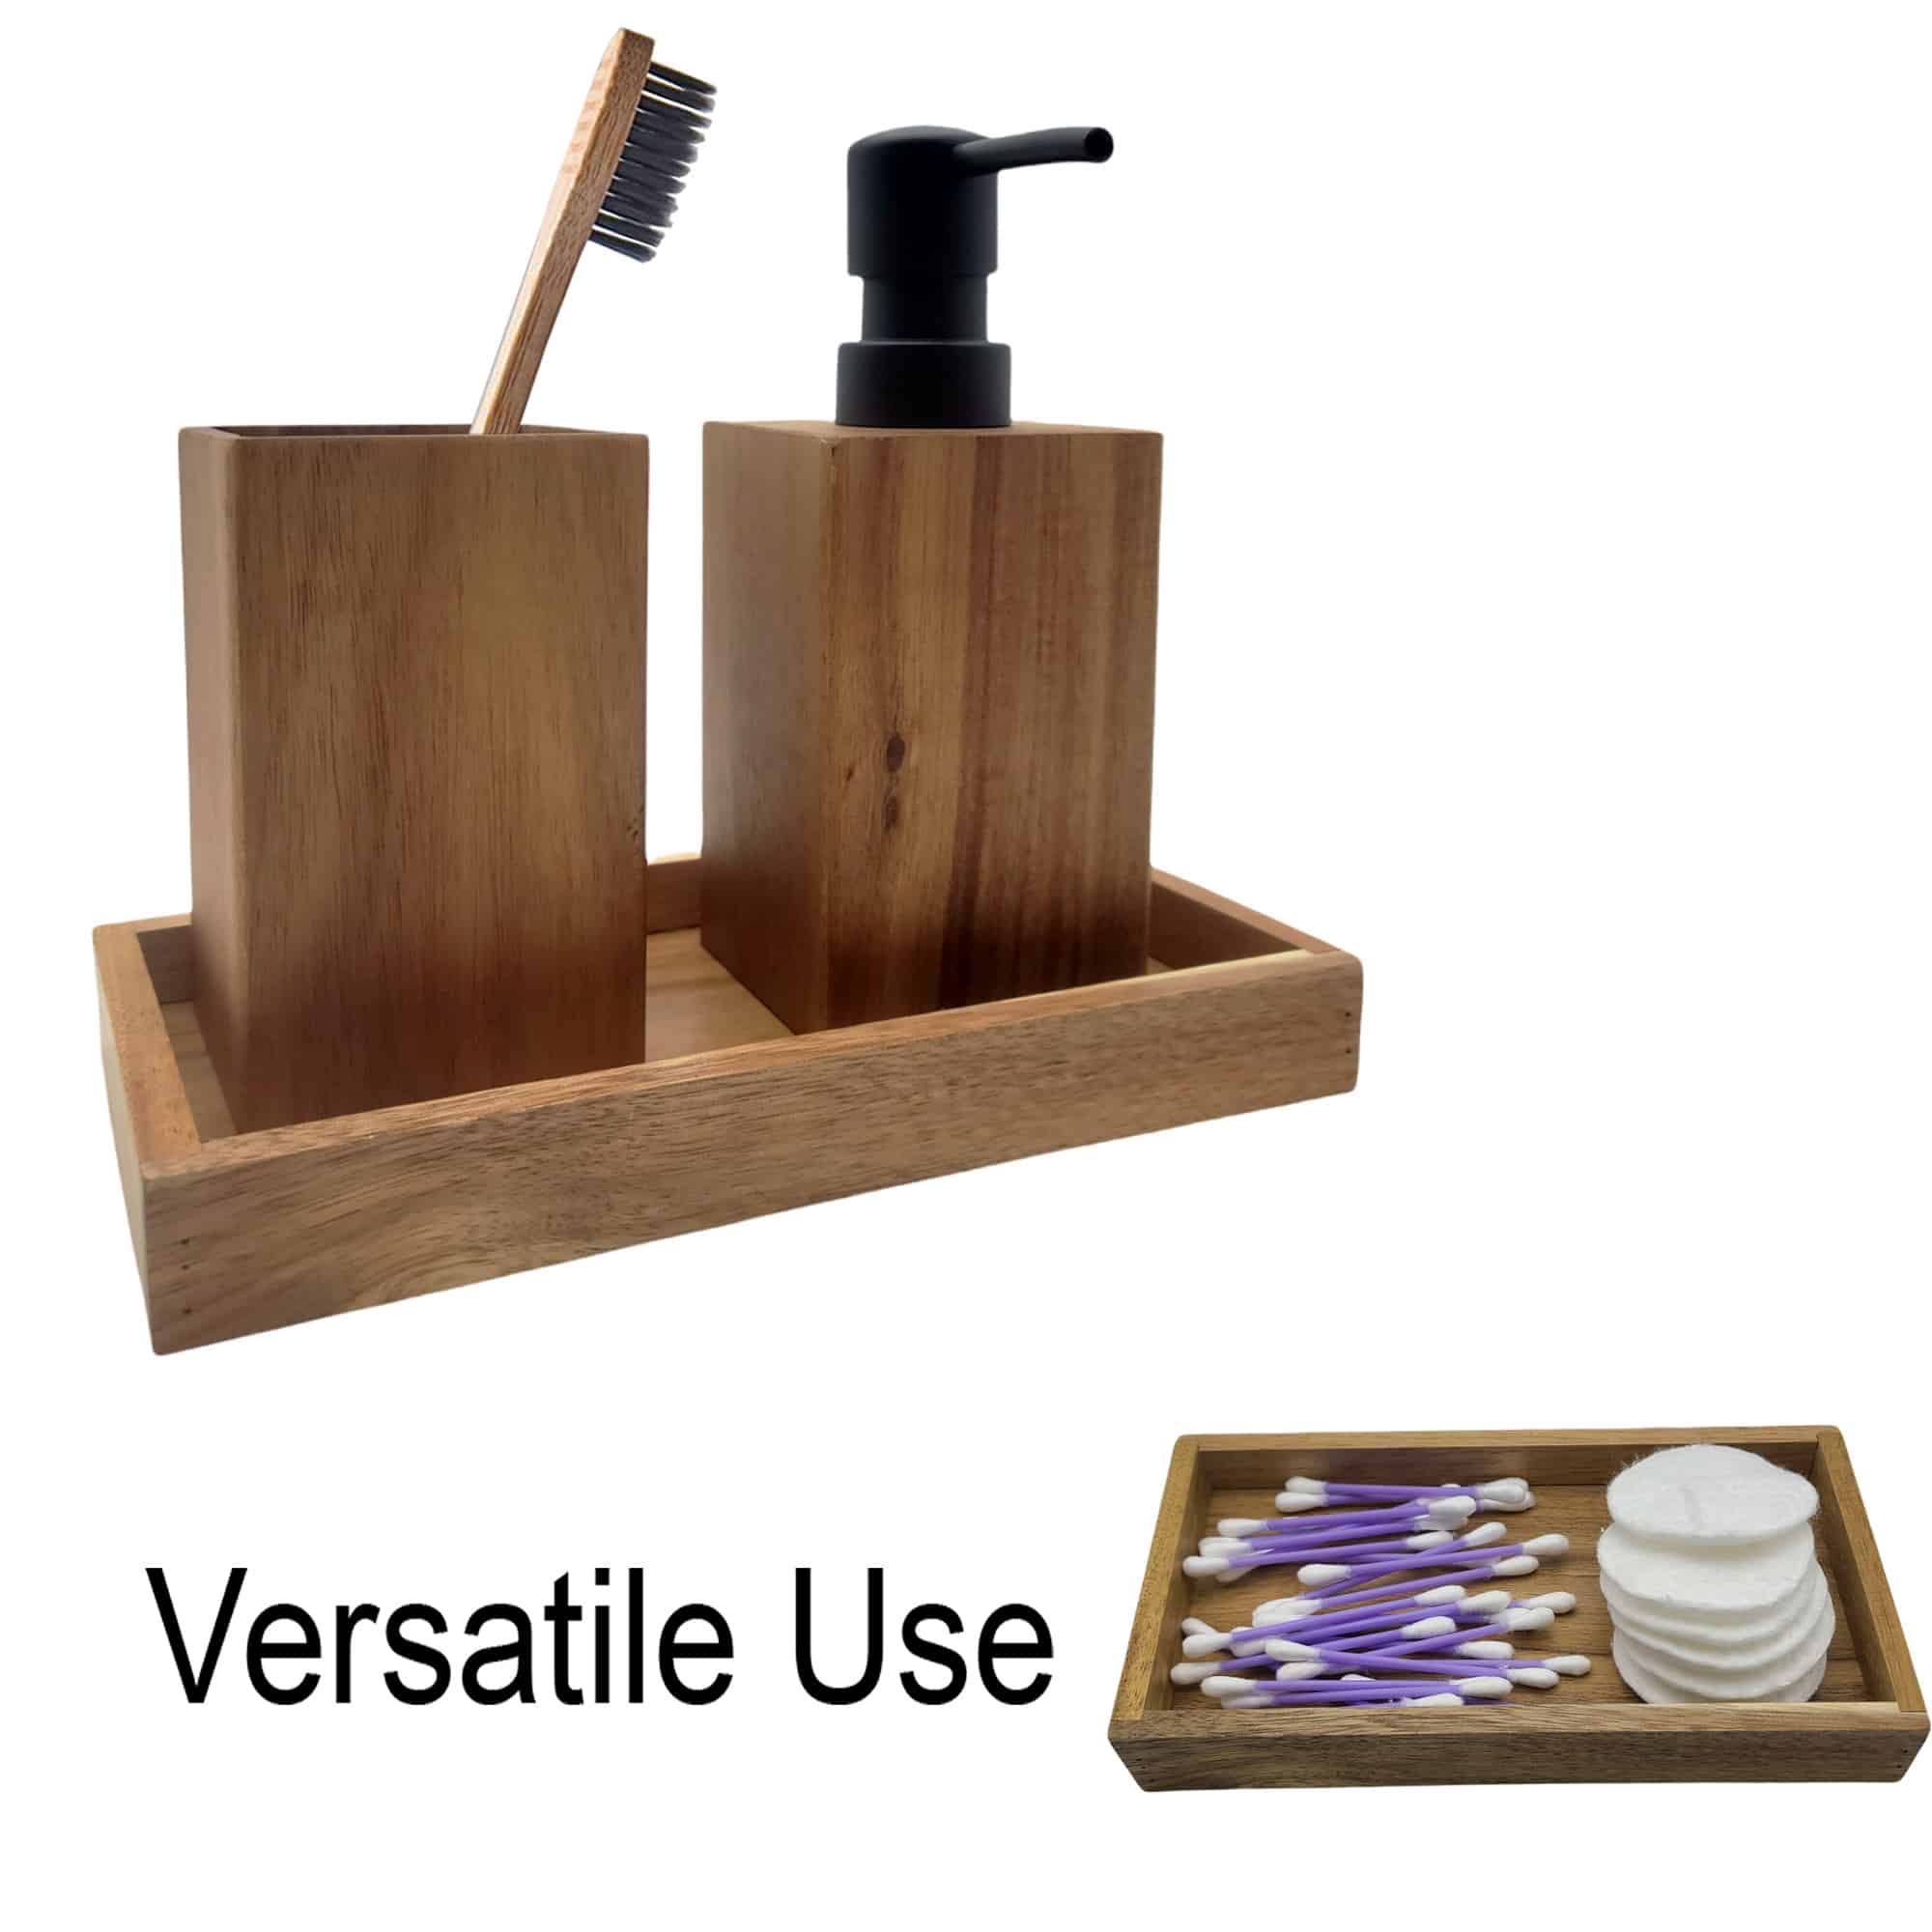 Modern Bathroom Accessories: Soap Dispensers, Vanity Trays & Tissue Box  Covers